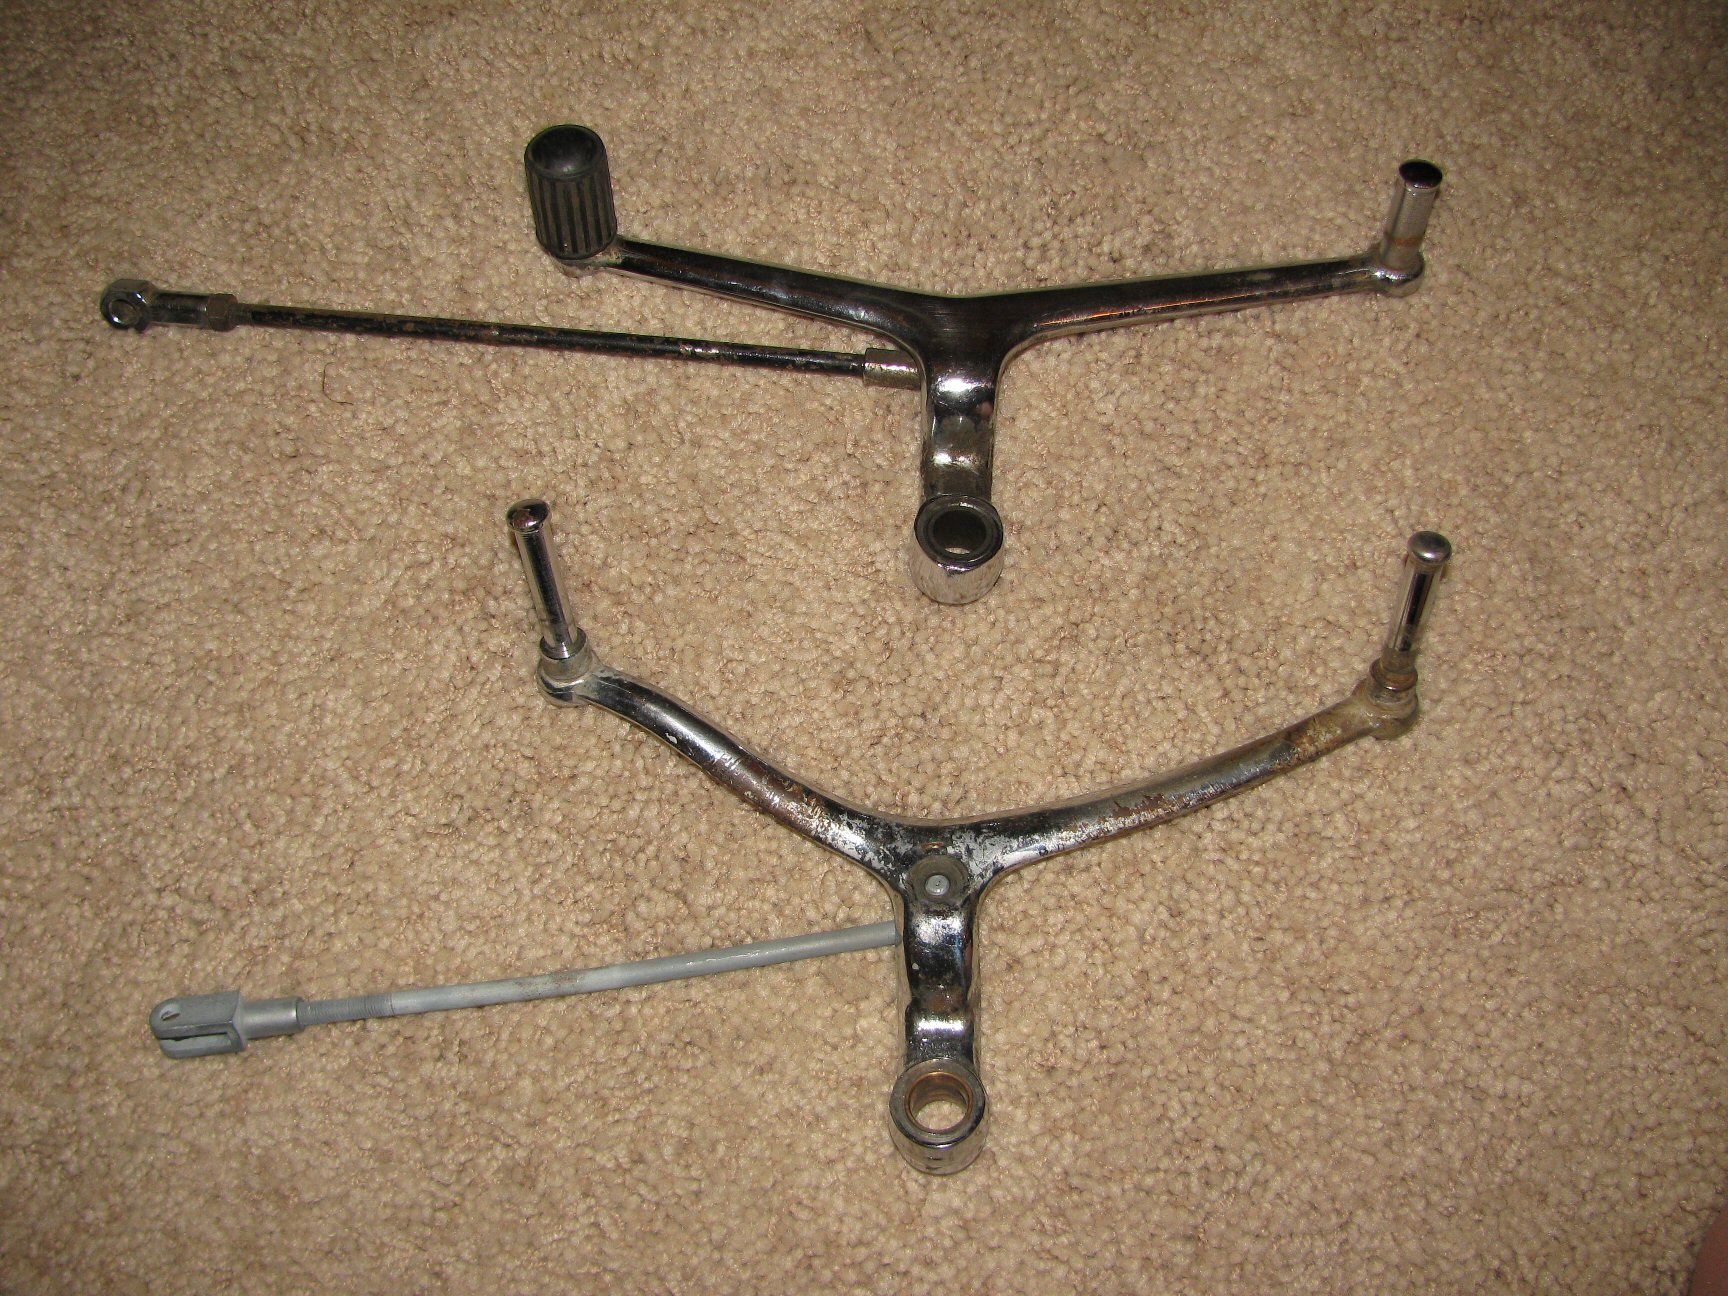 Outside view of both shift lever styles. Top shift lever is a later Tonti framed model. Bottom shift lever is from a loop frame.